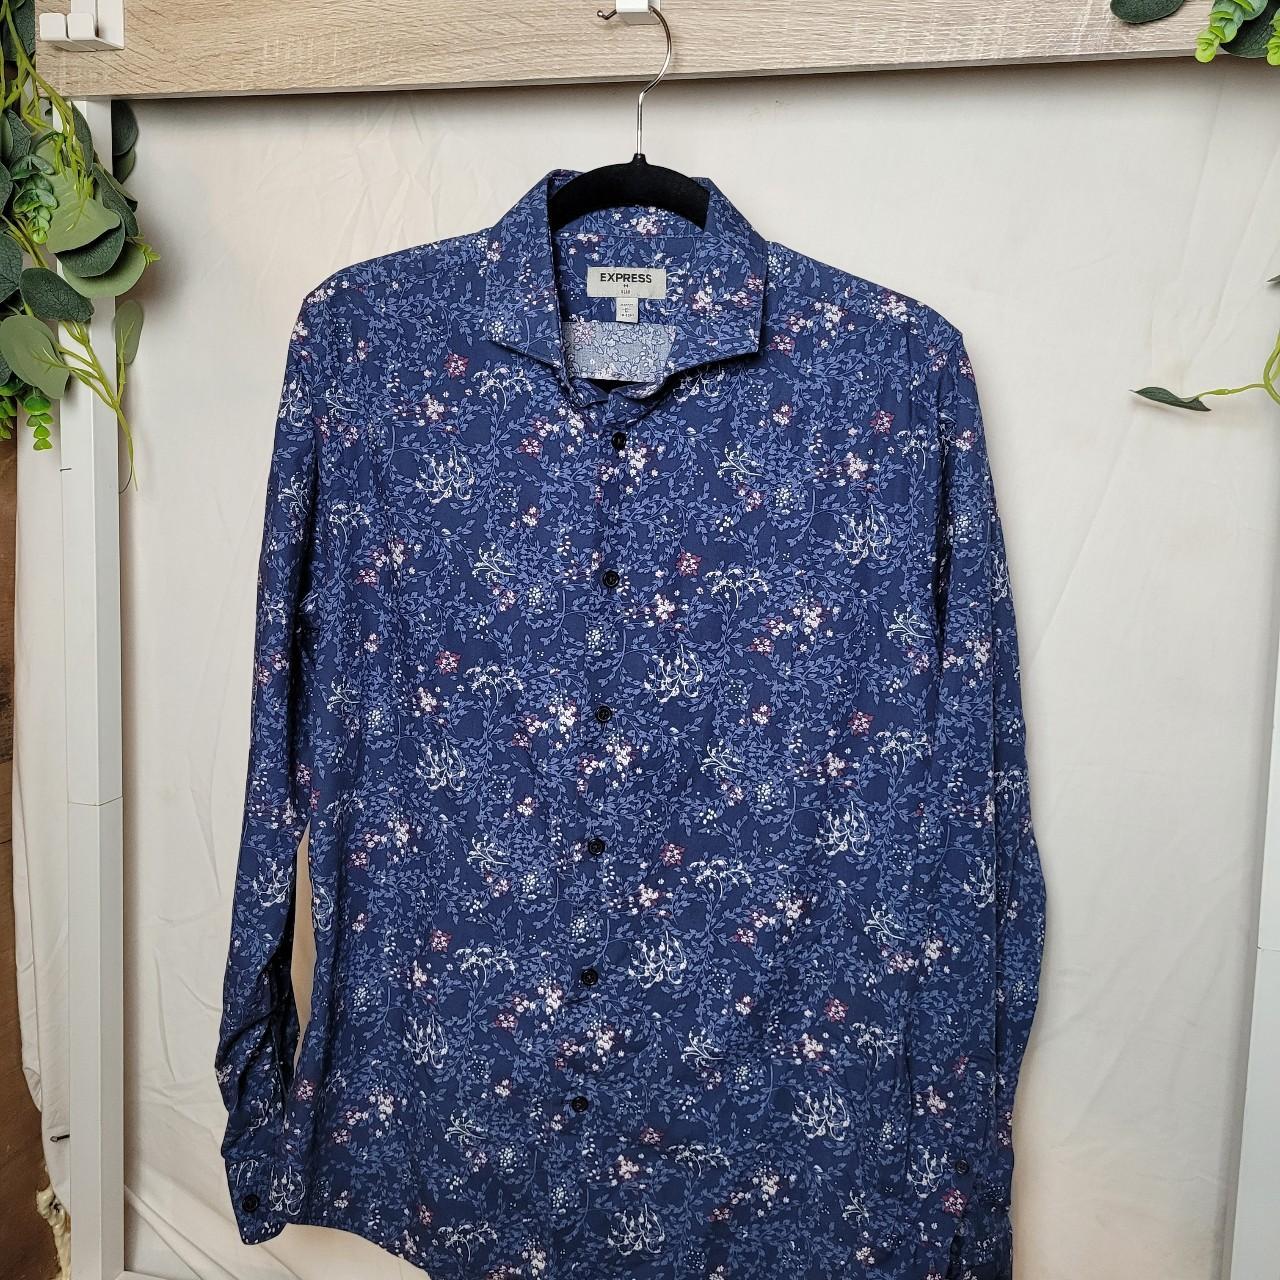 Men's Long Sleeve Woven Button Up Shirt In A Calico Navy Floral